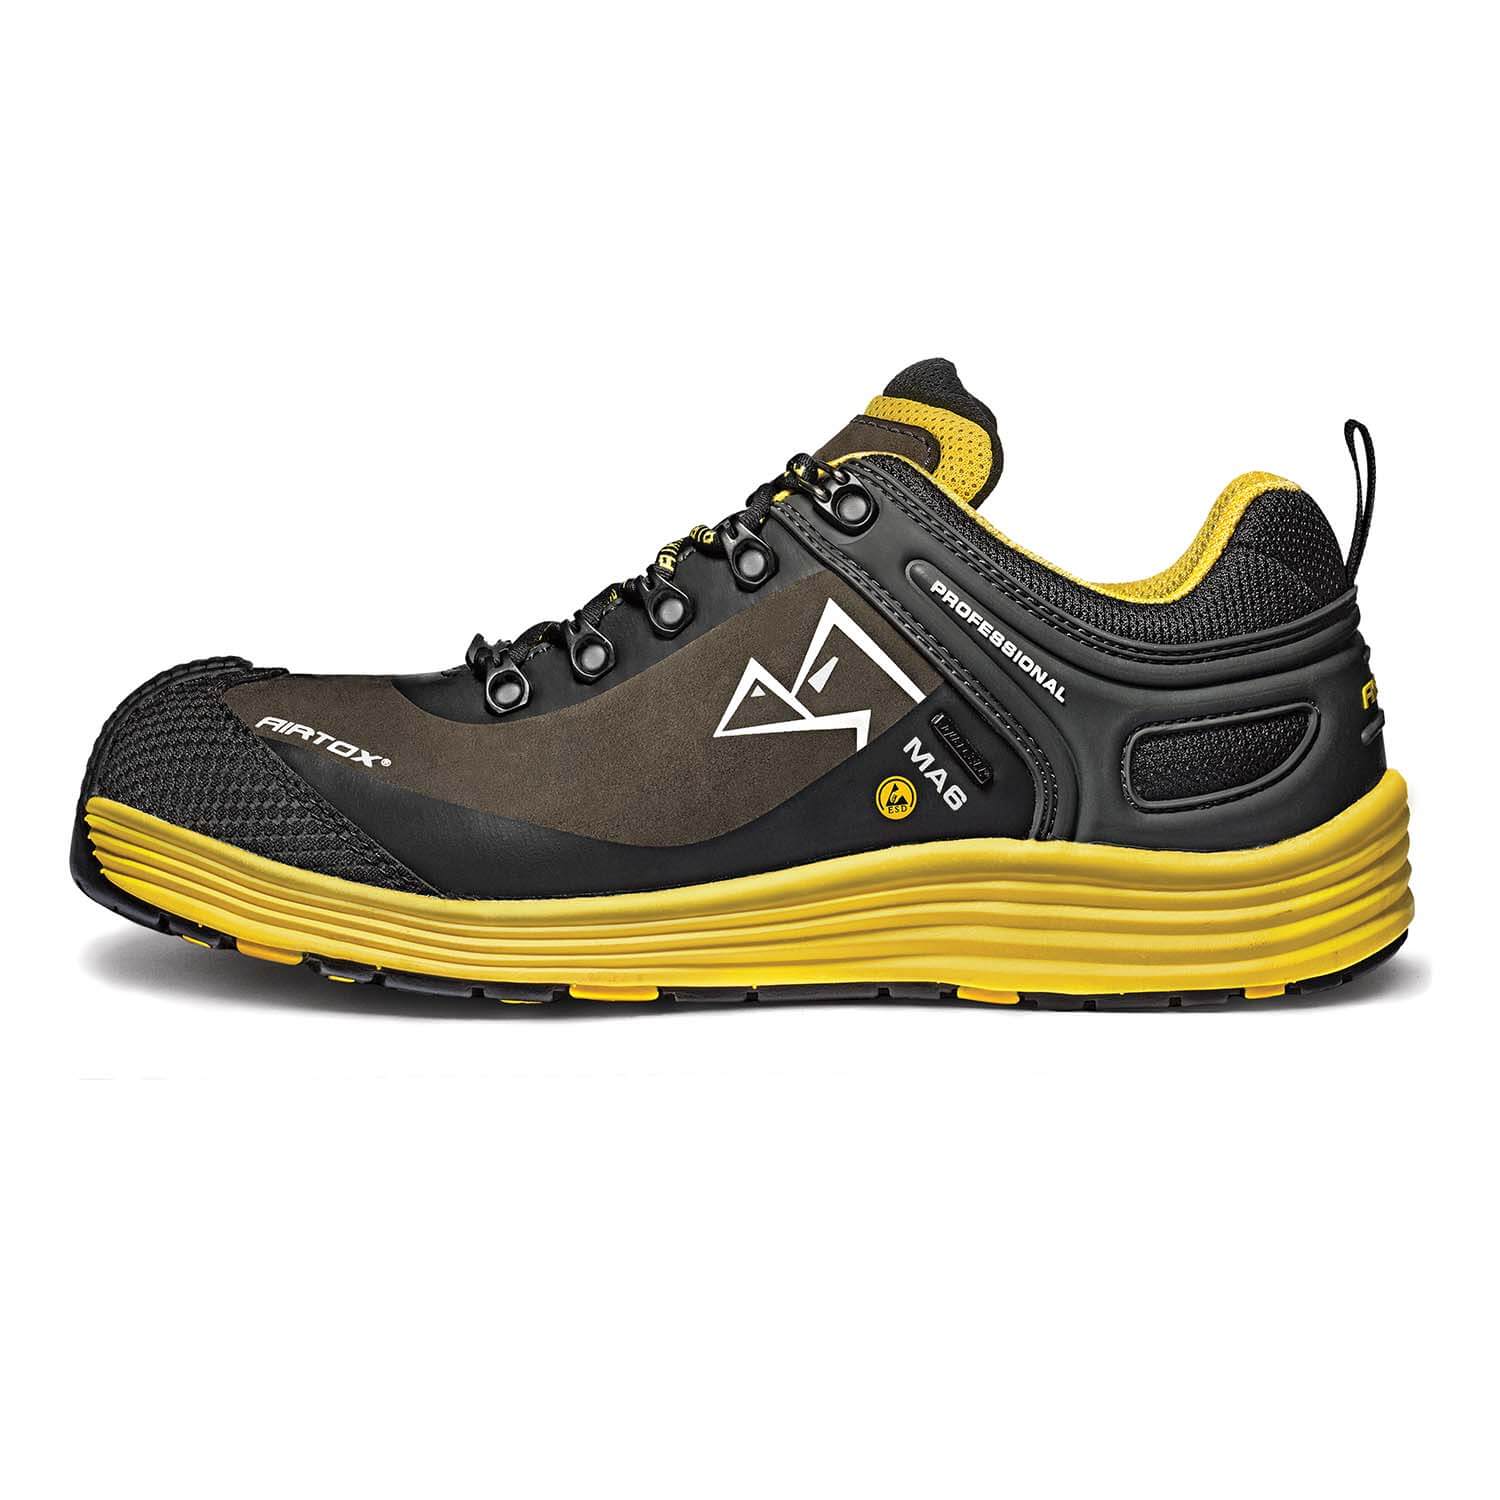 Waterproof and comfortable safety shoes - MA6 - AIRTOX